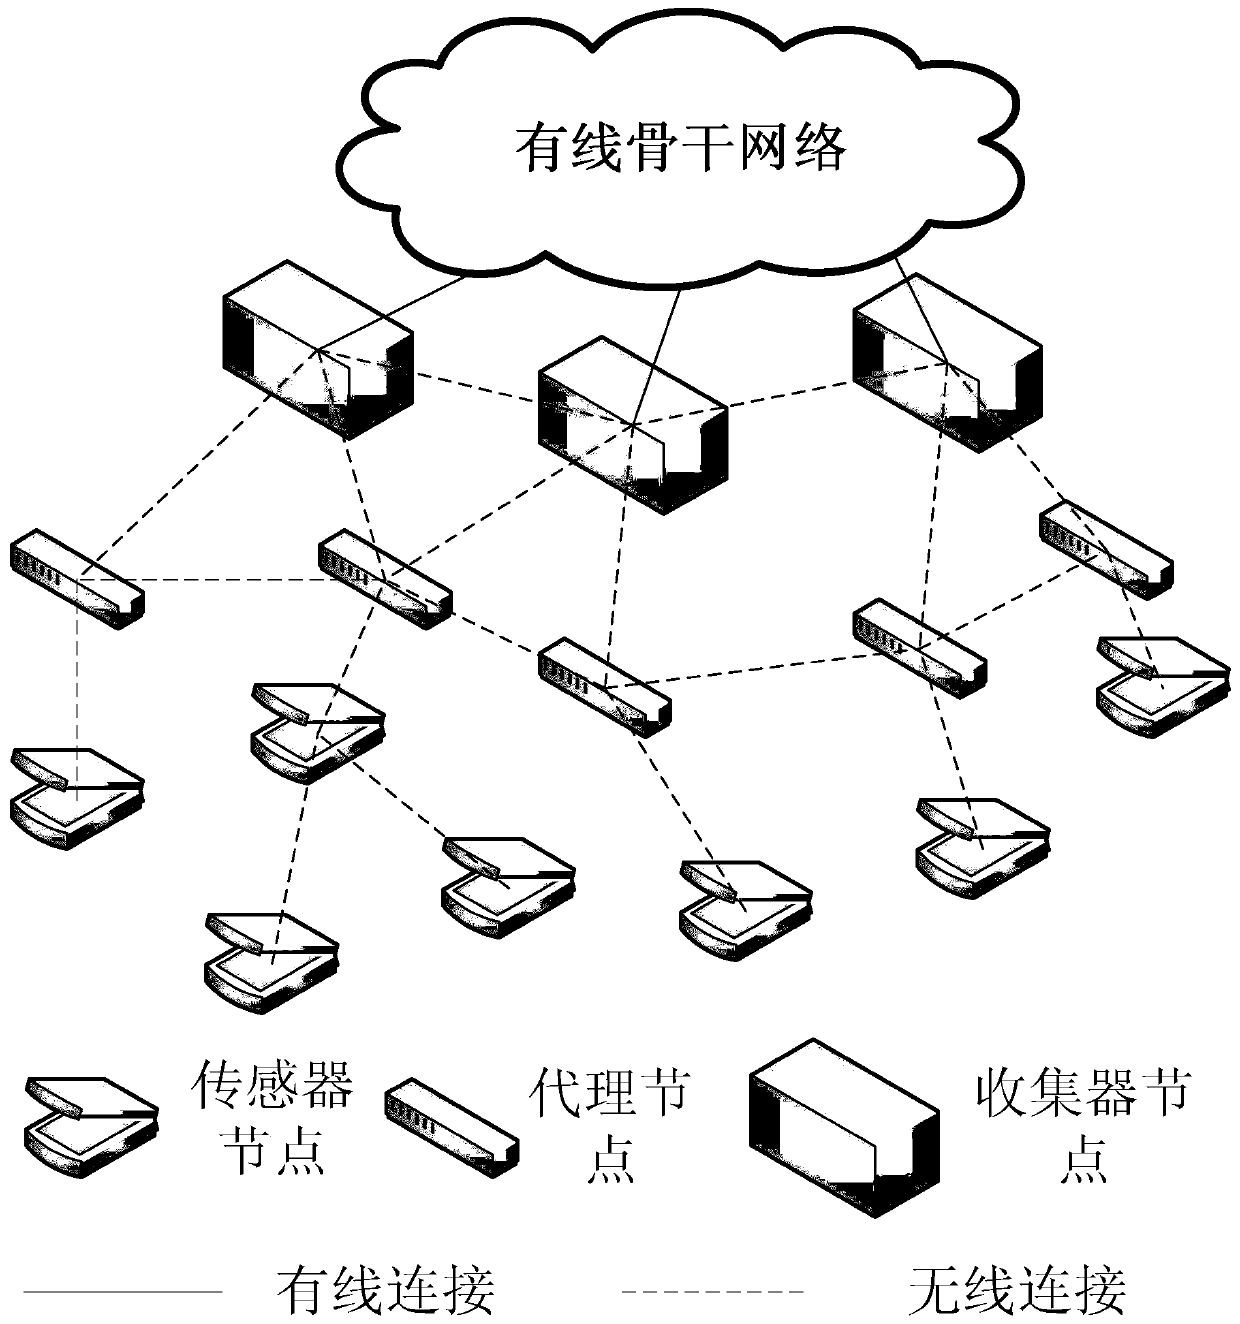 A load balancing method and system for ecological monitoring ipv6 sensor network